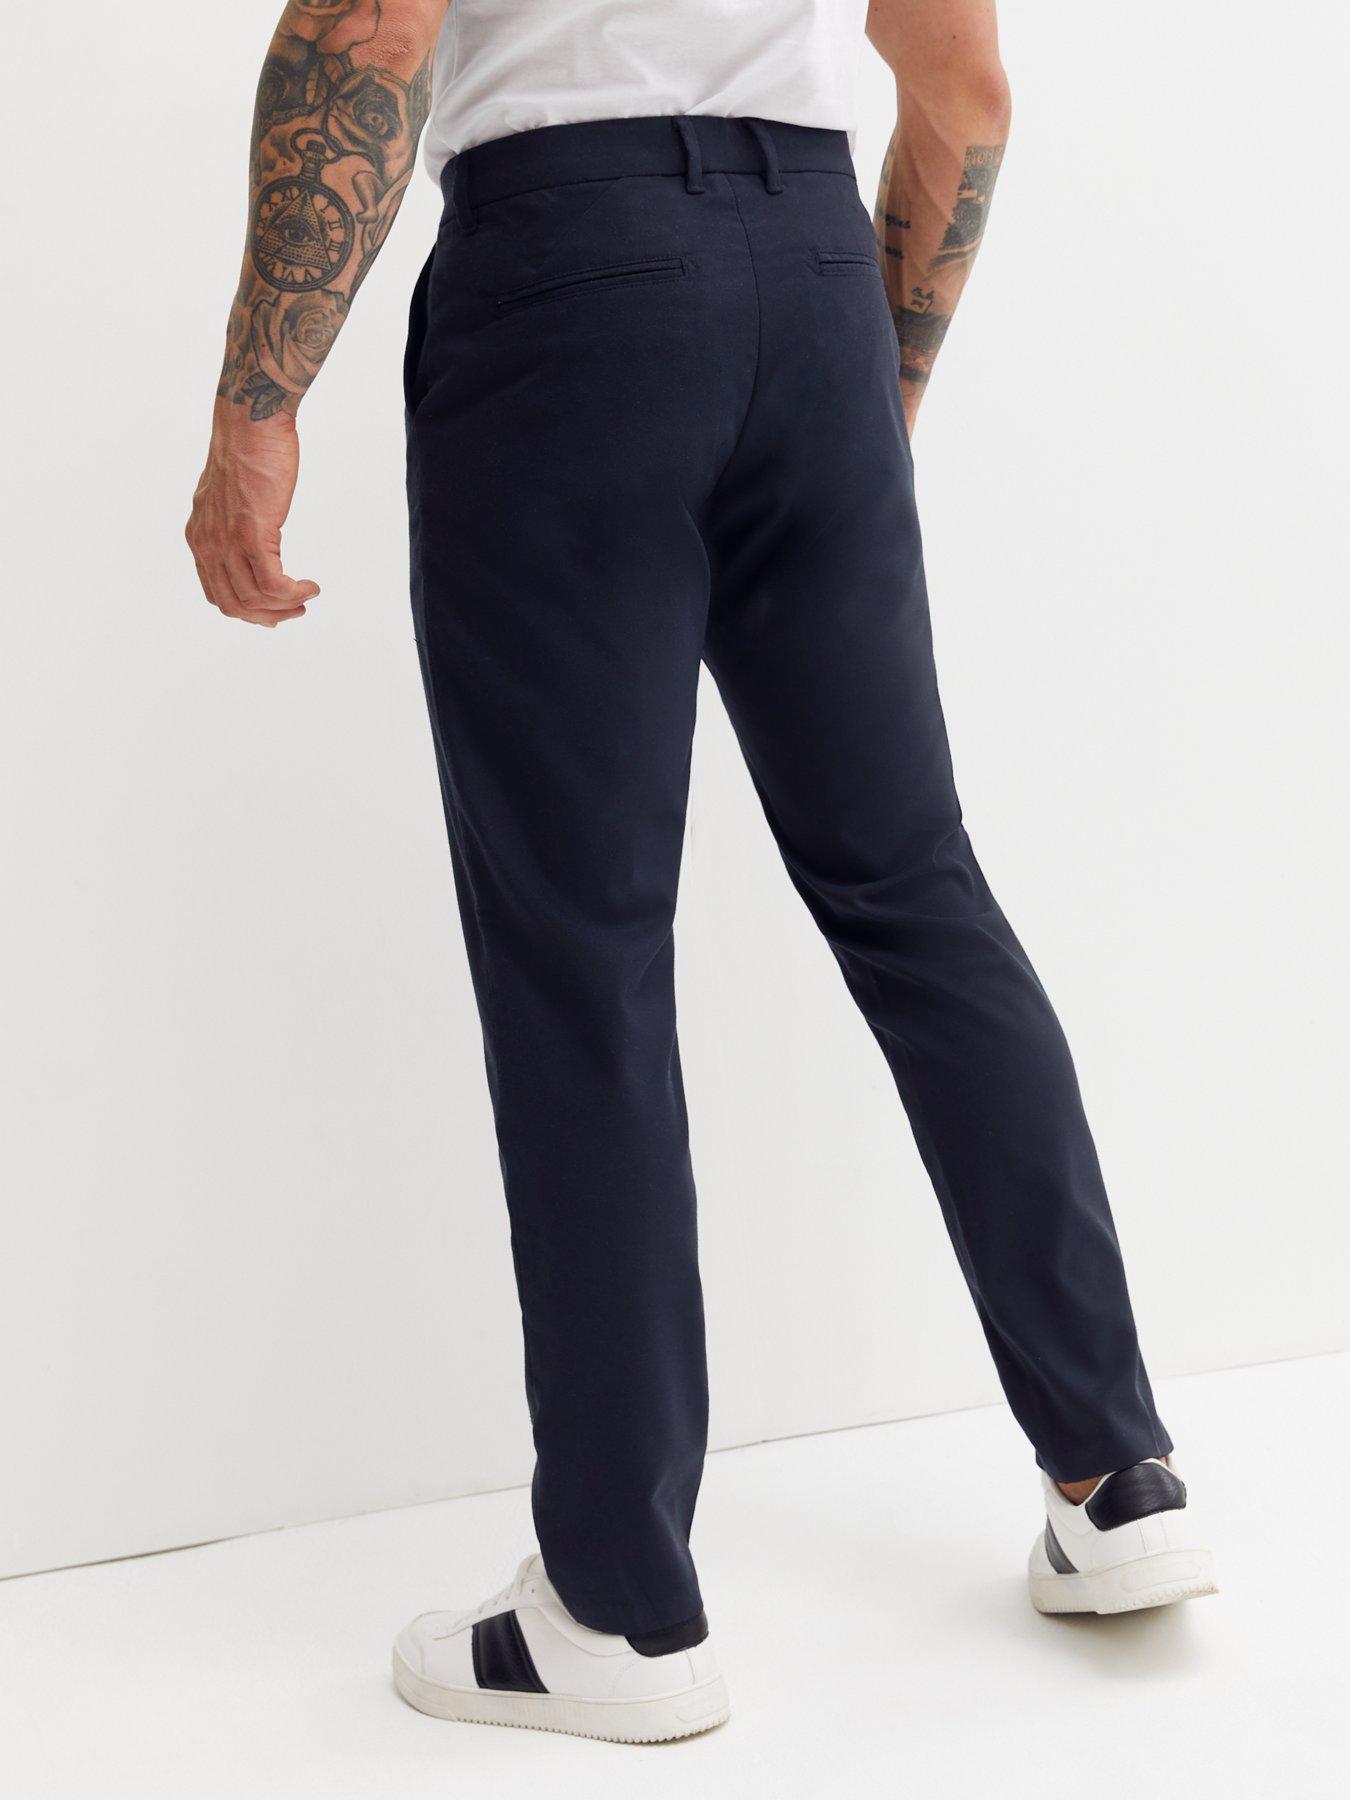 New Look Navy Mid Rise Slim Suit Trousers | very.co.uk